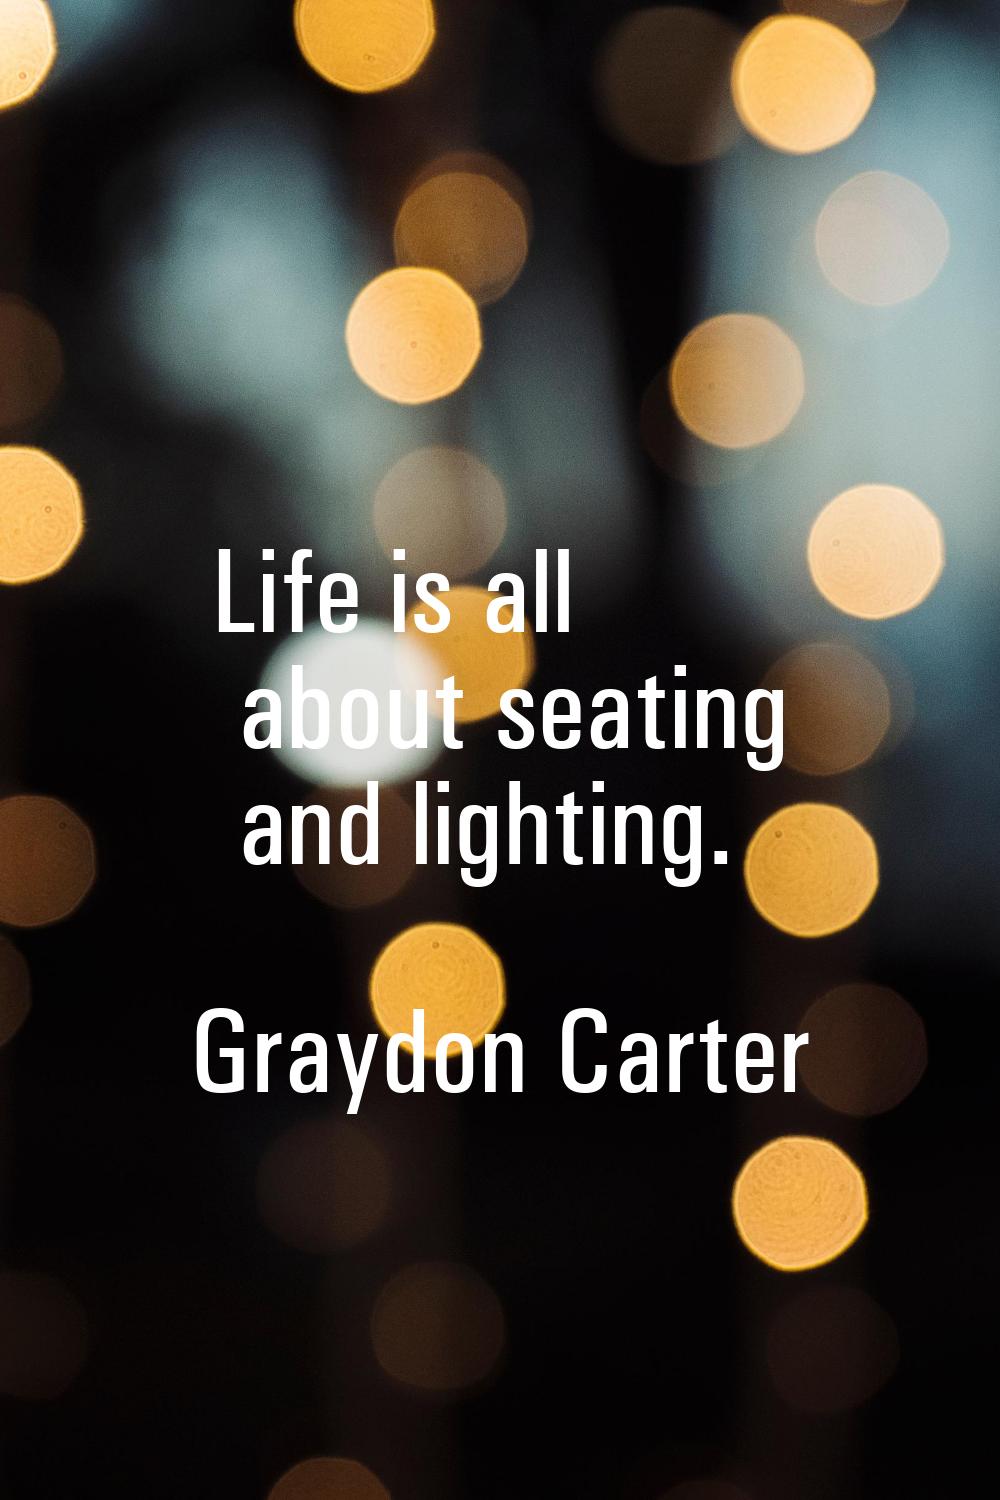 Life is all about seating and lighting.